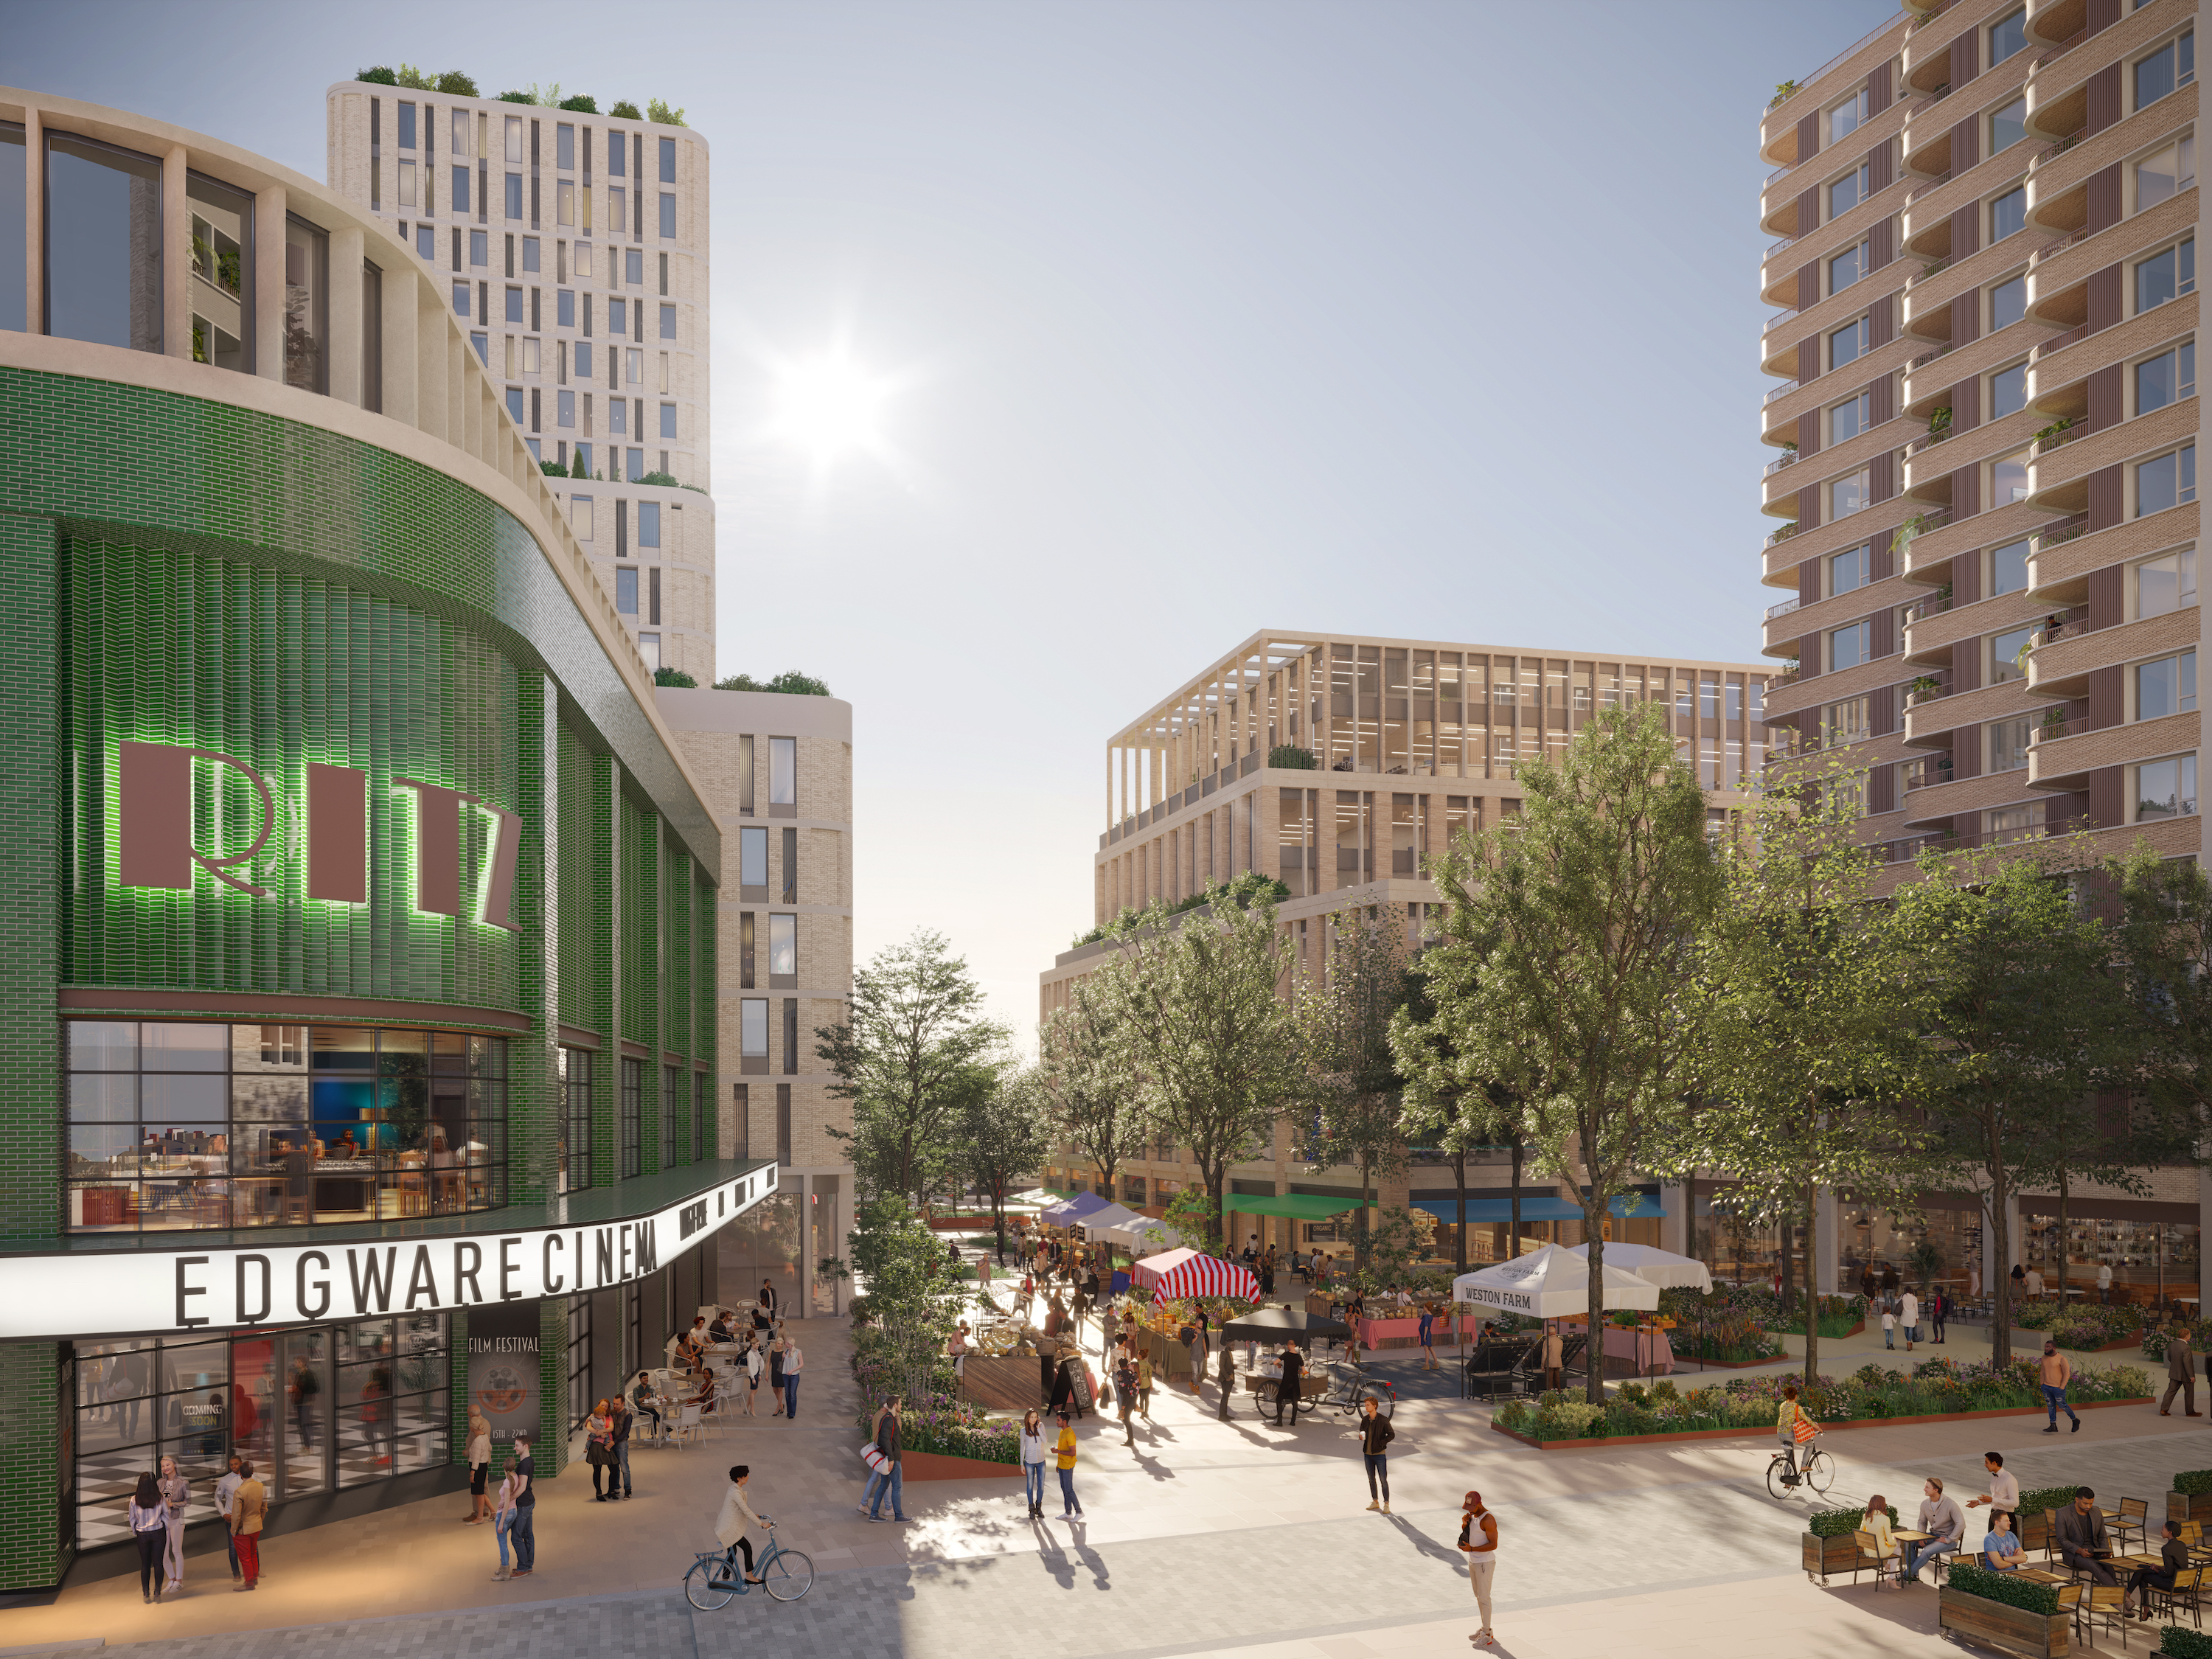 Ballymore submits application for Edgware town centre redevelopment